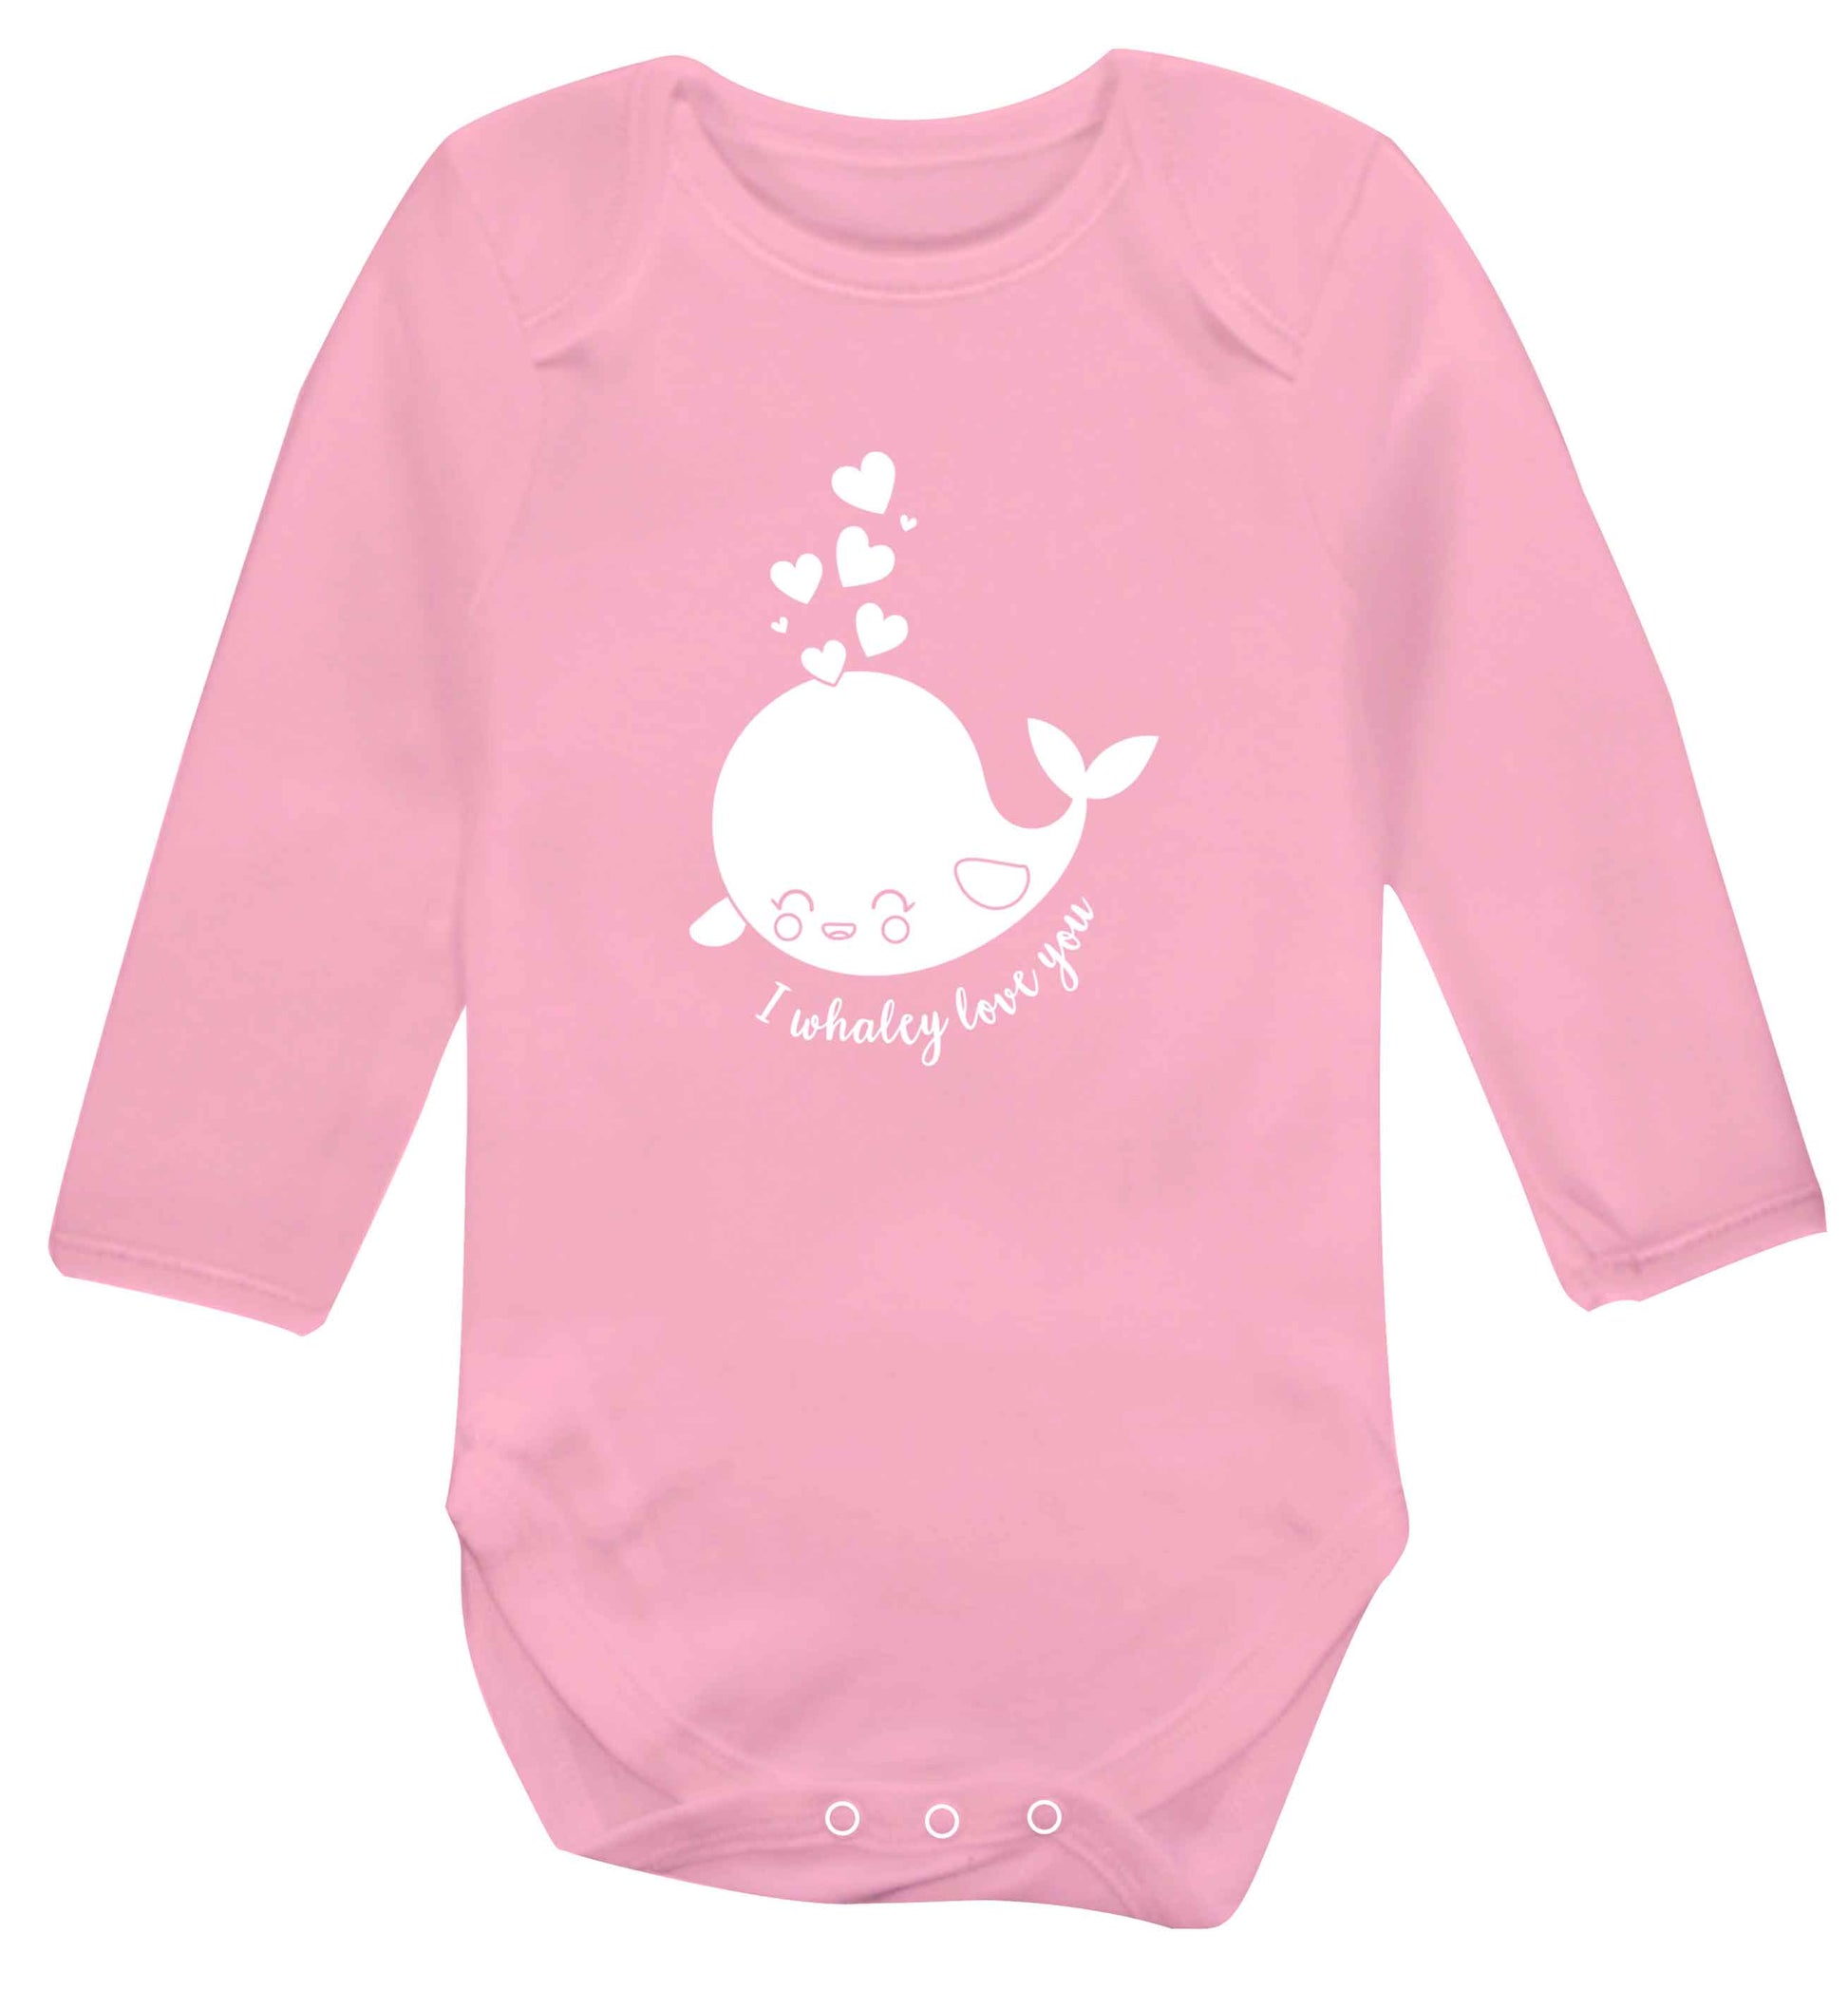 I whaley love you baby vest long sleeved pale pink 6-12 months